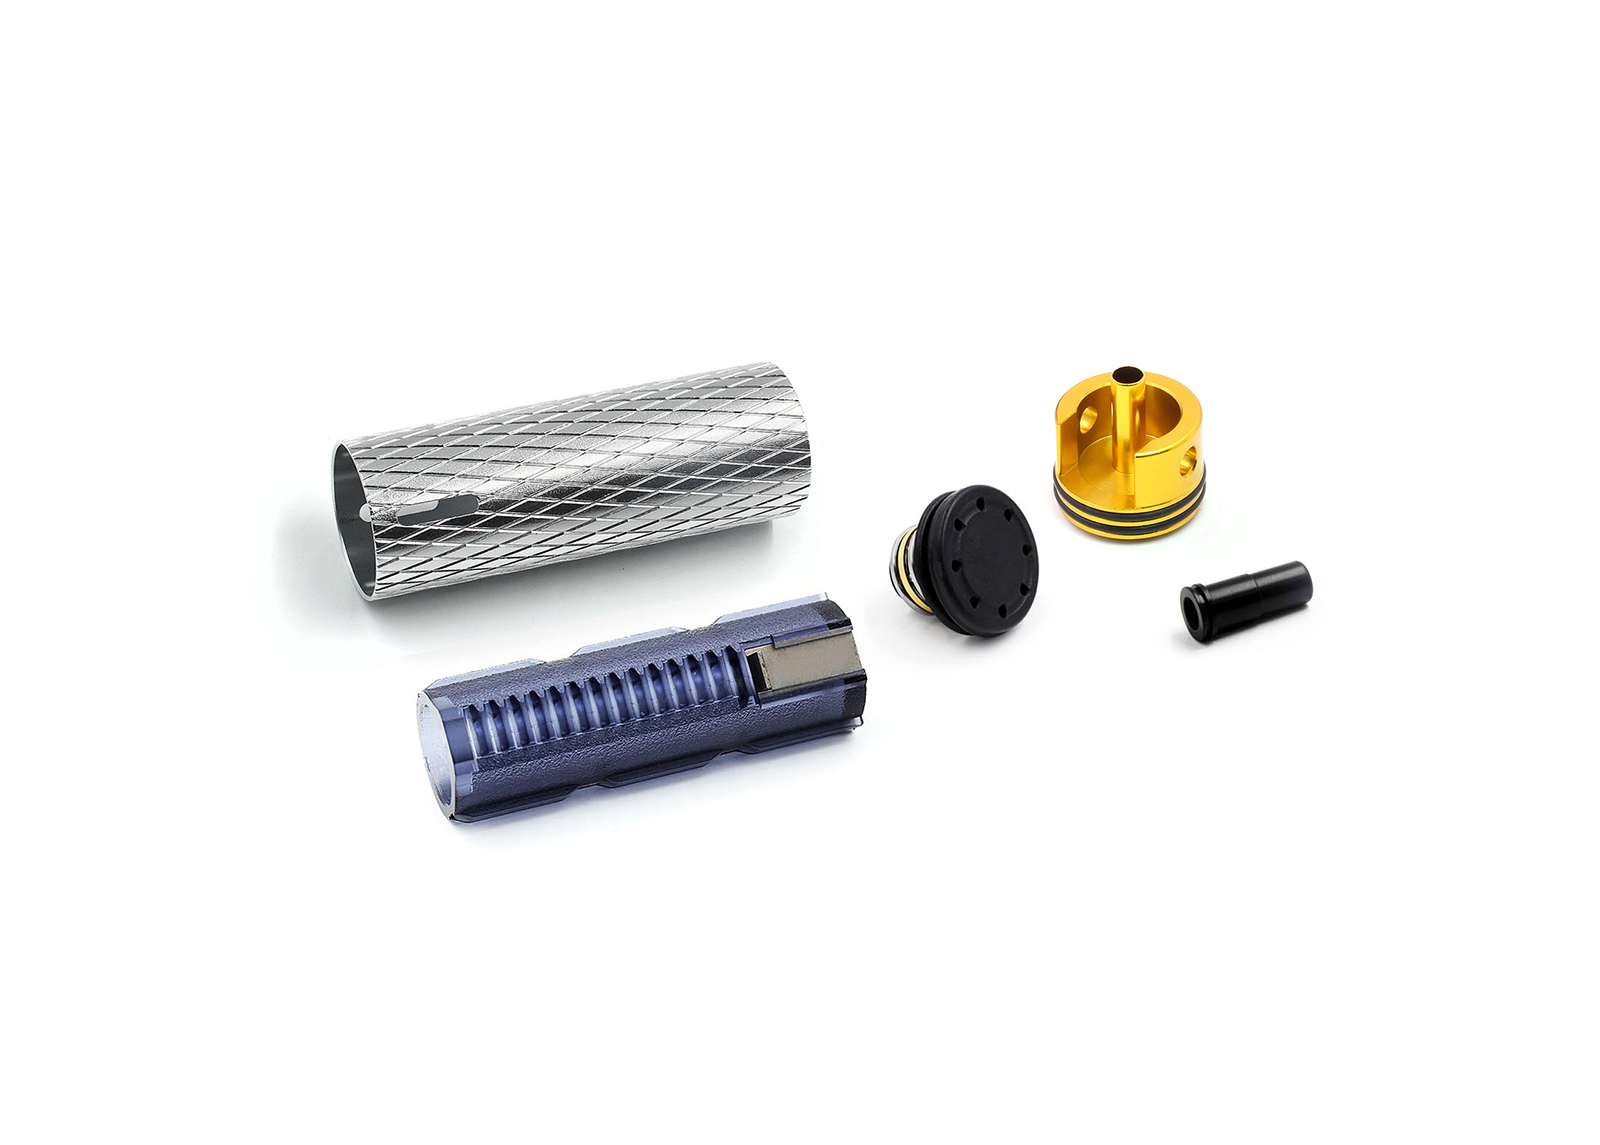 Cylinder Set for XM177-E2 - Modify Airsoft parts